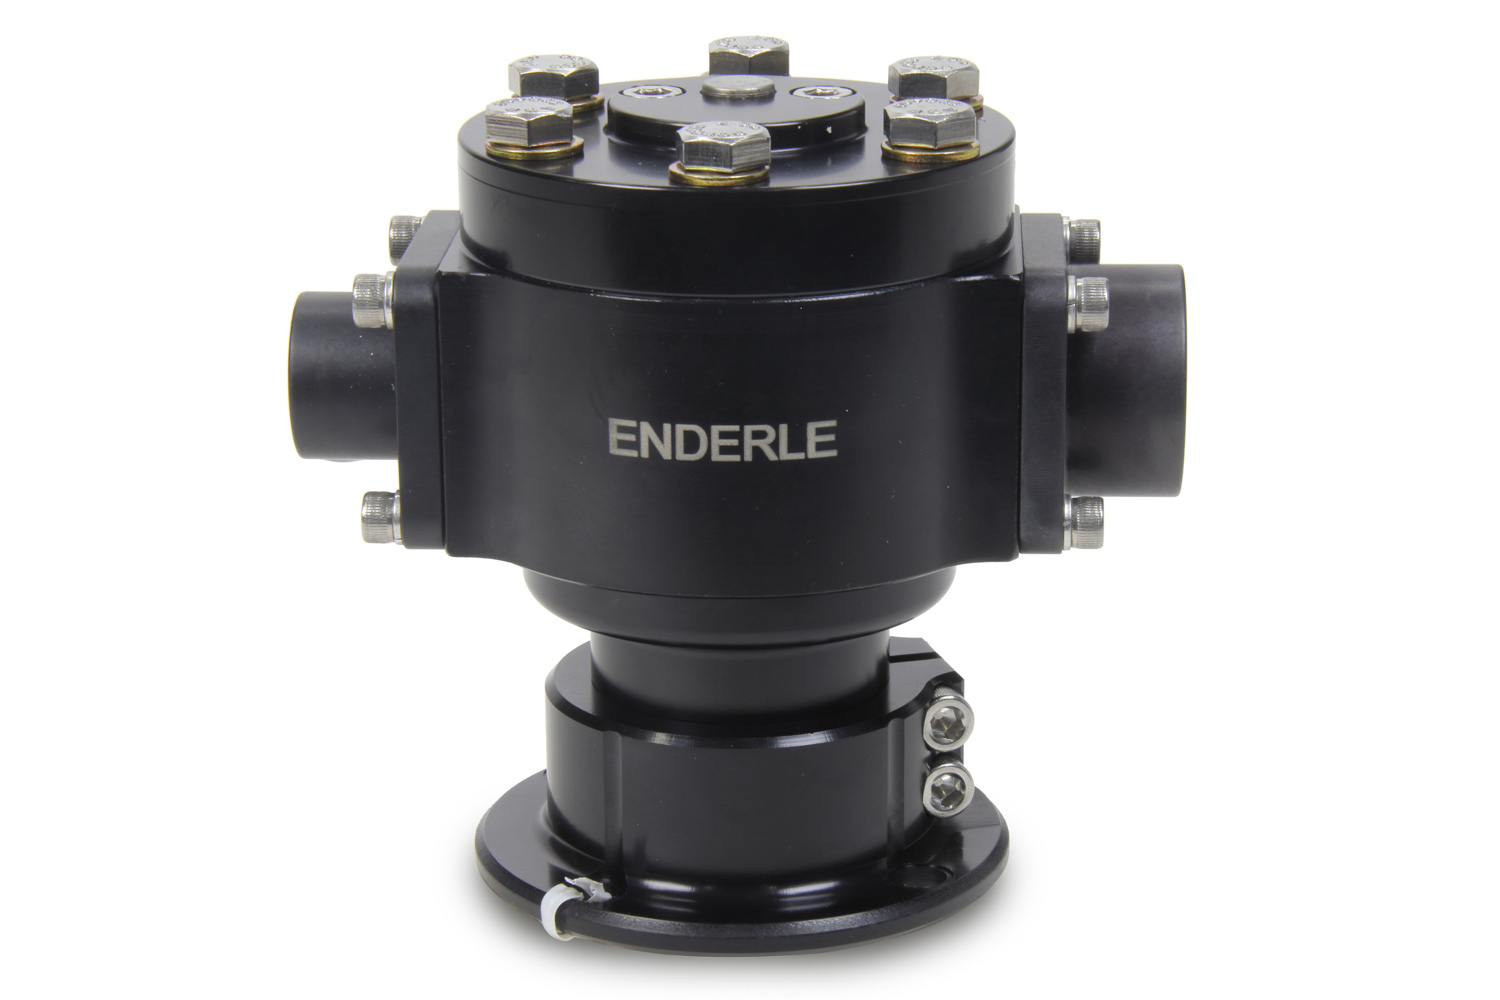 Enderle 3003 Fuel Pump, Hex Driven, 7.0 gph, In-Line, 8 AN Female O-Ring Inlet / Outlet, Aluminum, Black Paint, Alcohol / E85 / Gas, Each